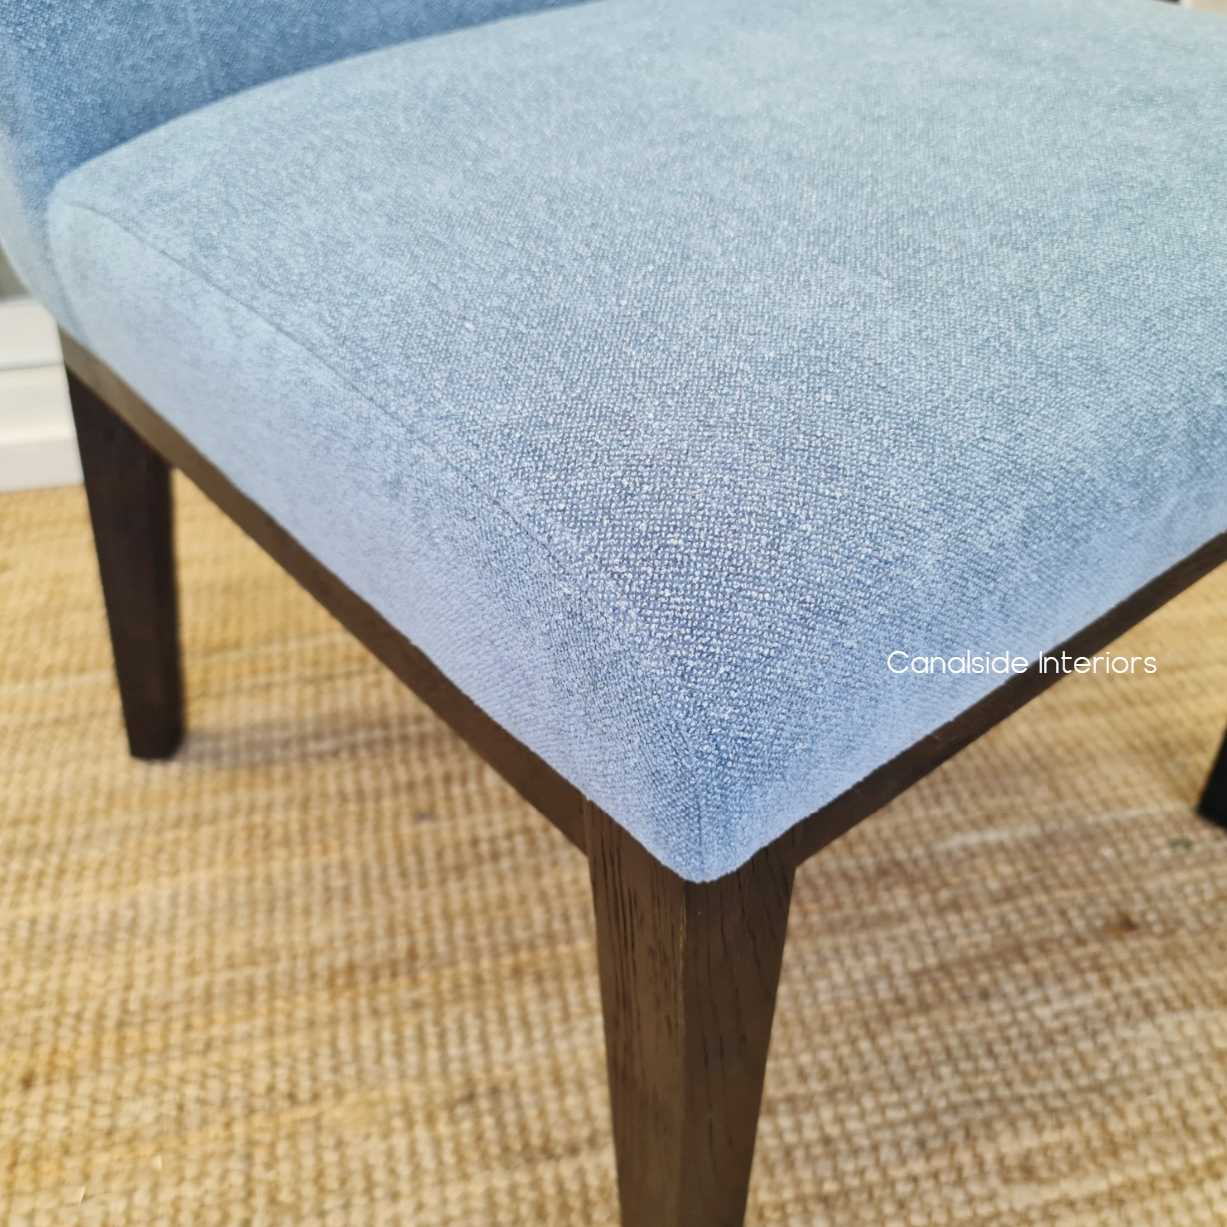 Norris Dining Chair Hamptons Blue Chenille upholstery deep espresso brown legs base, CHAIRS, HAMPTONS Style, PLANTATION Style, CHAIRS Dining